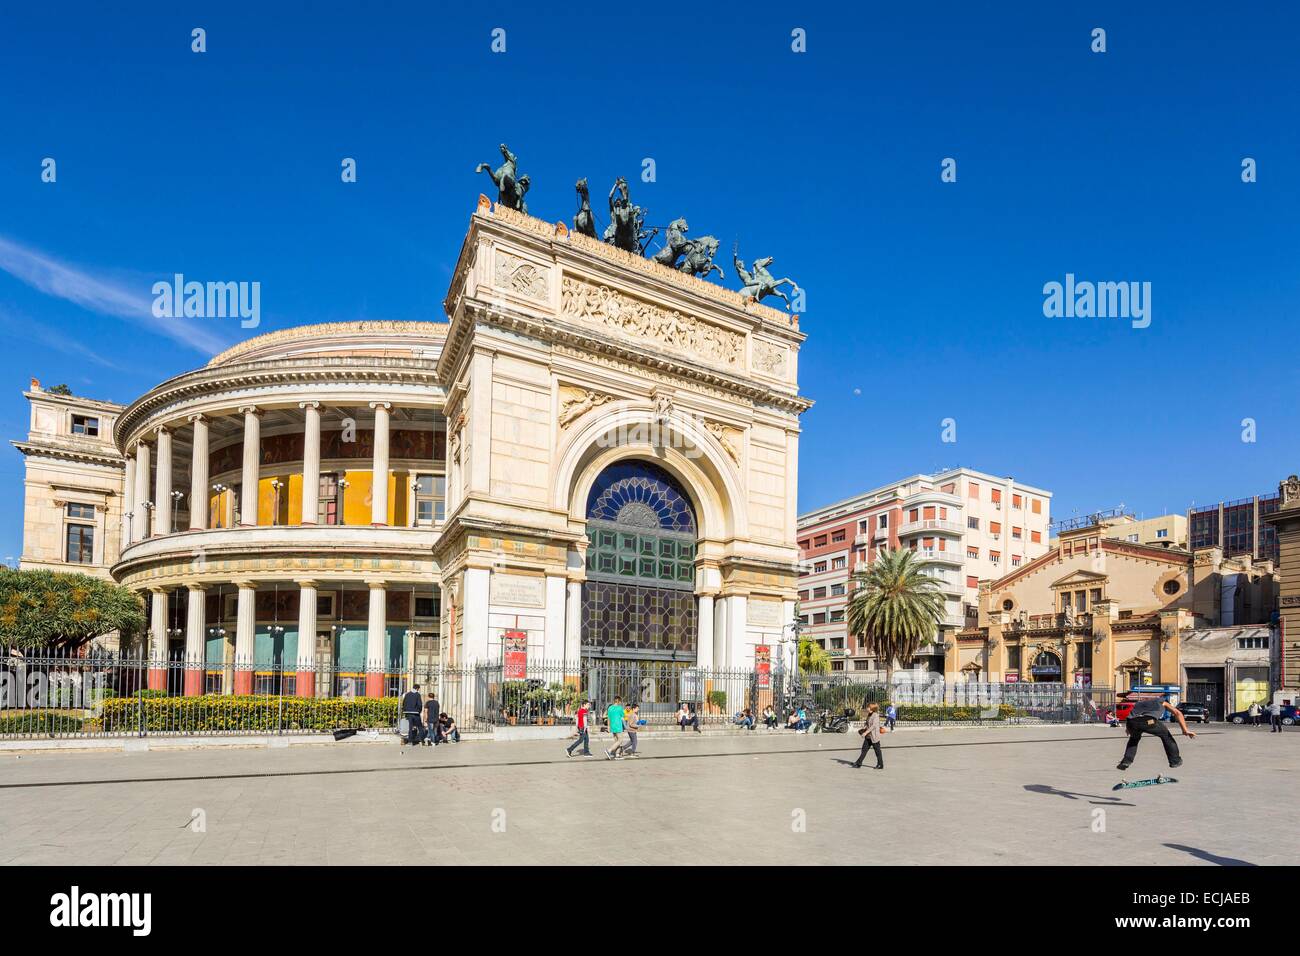 Italy, Sicily, Palermo, a place Ruggero Settimo-, Politeama Theatre, built from 1865 to 1891. Stock Photo